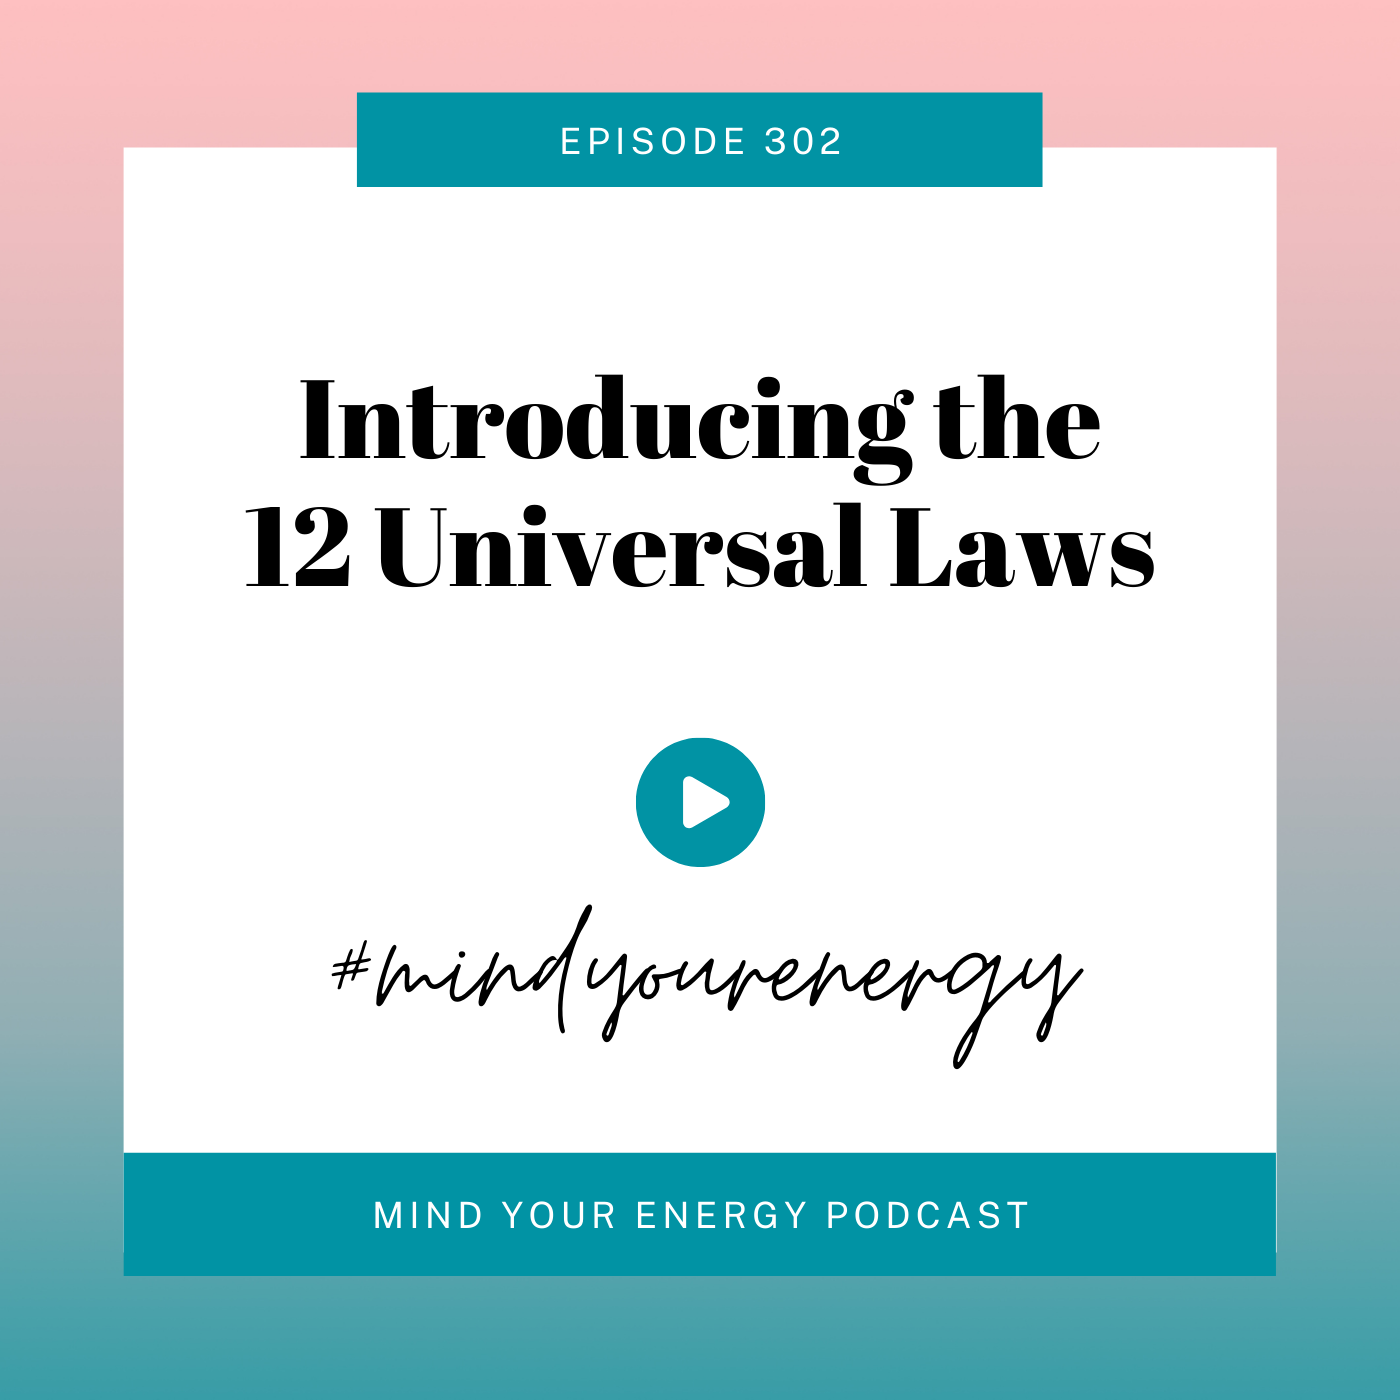 Introducing the 12 Universal Laws